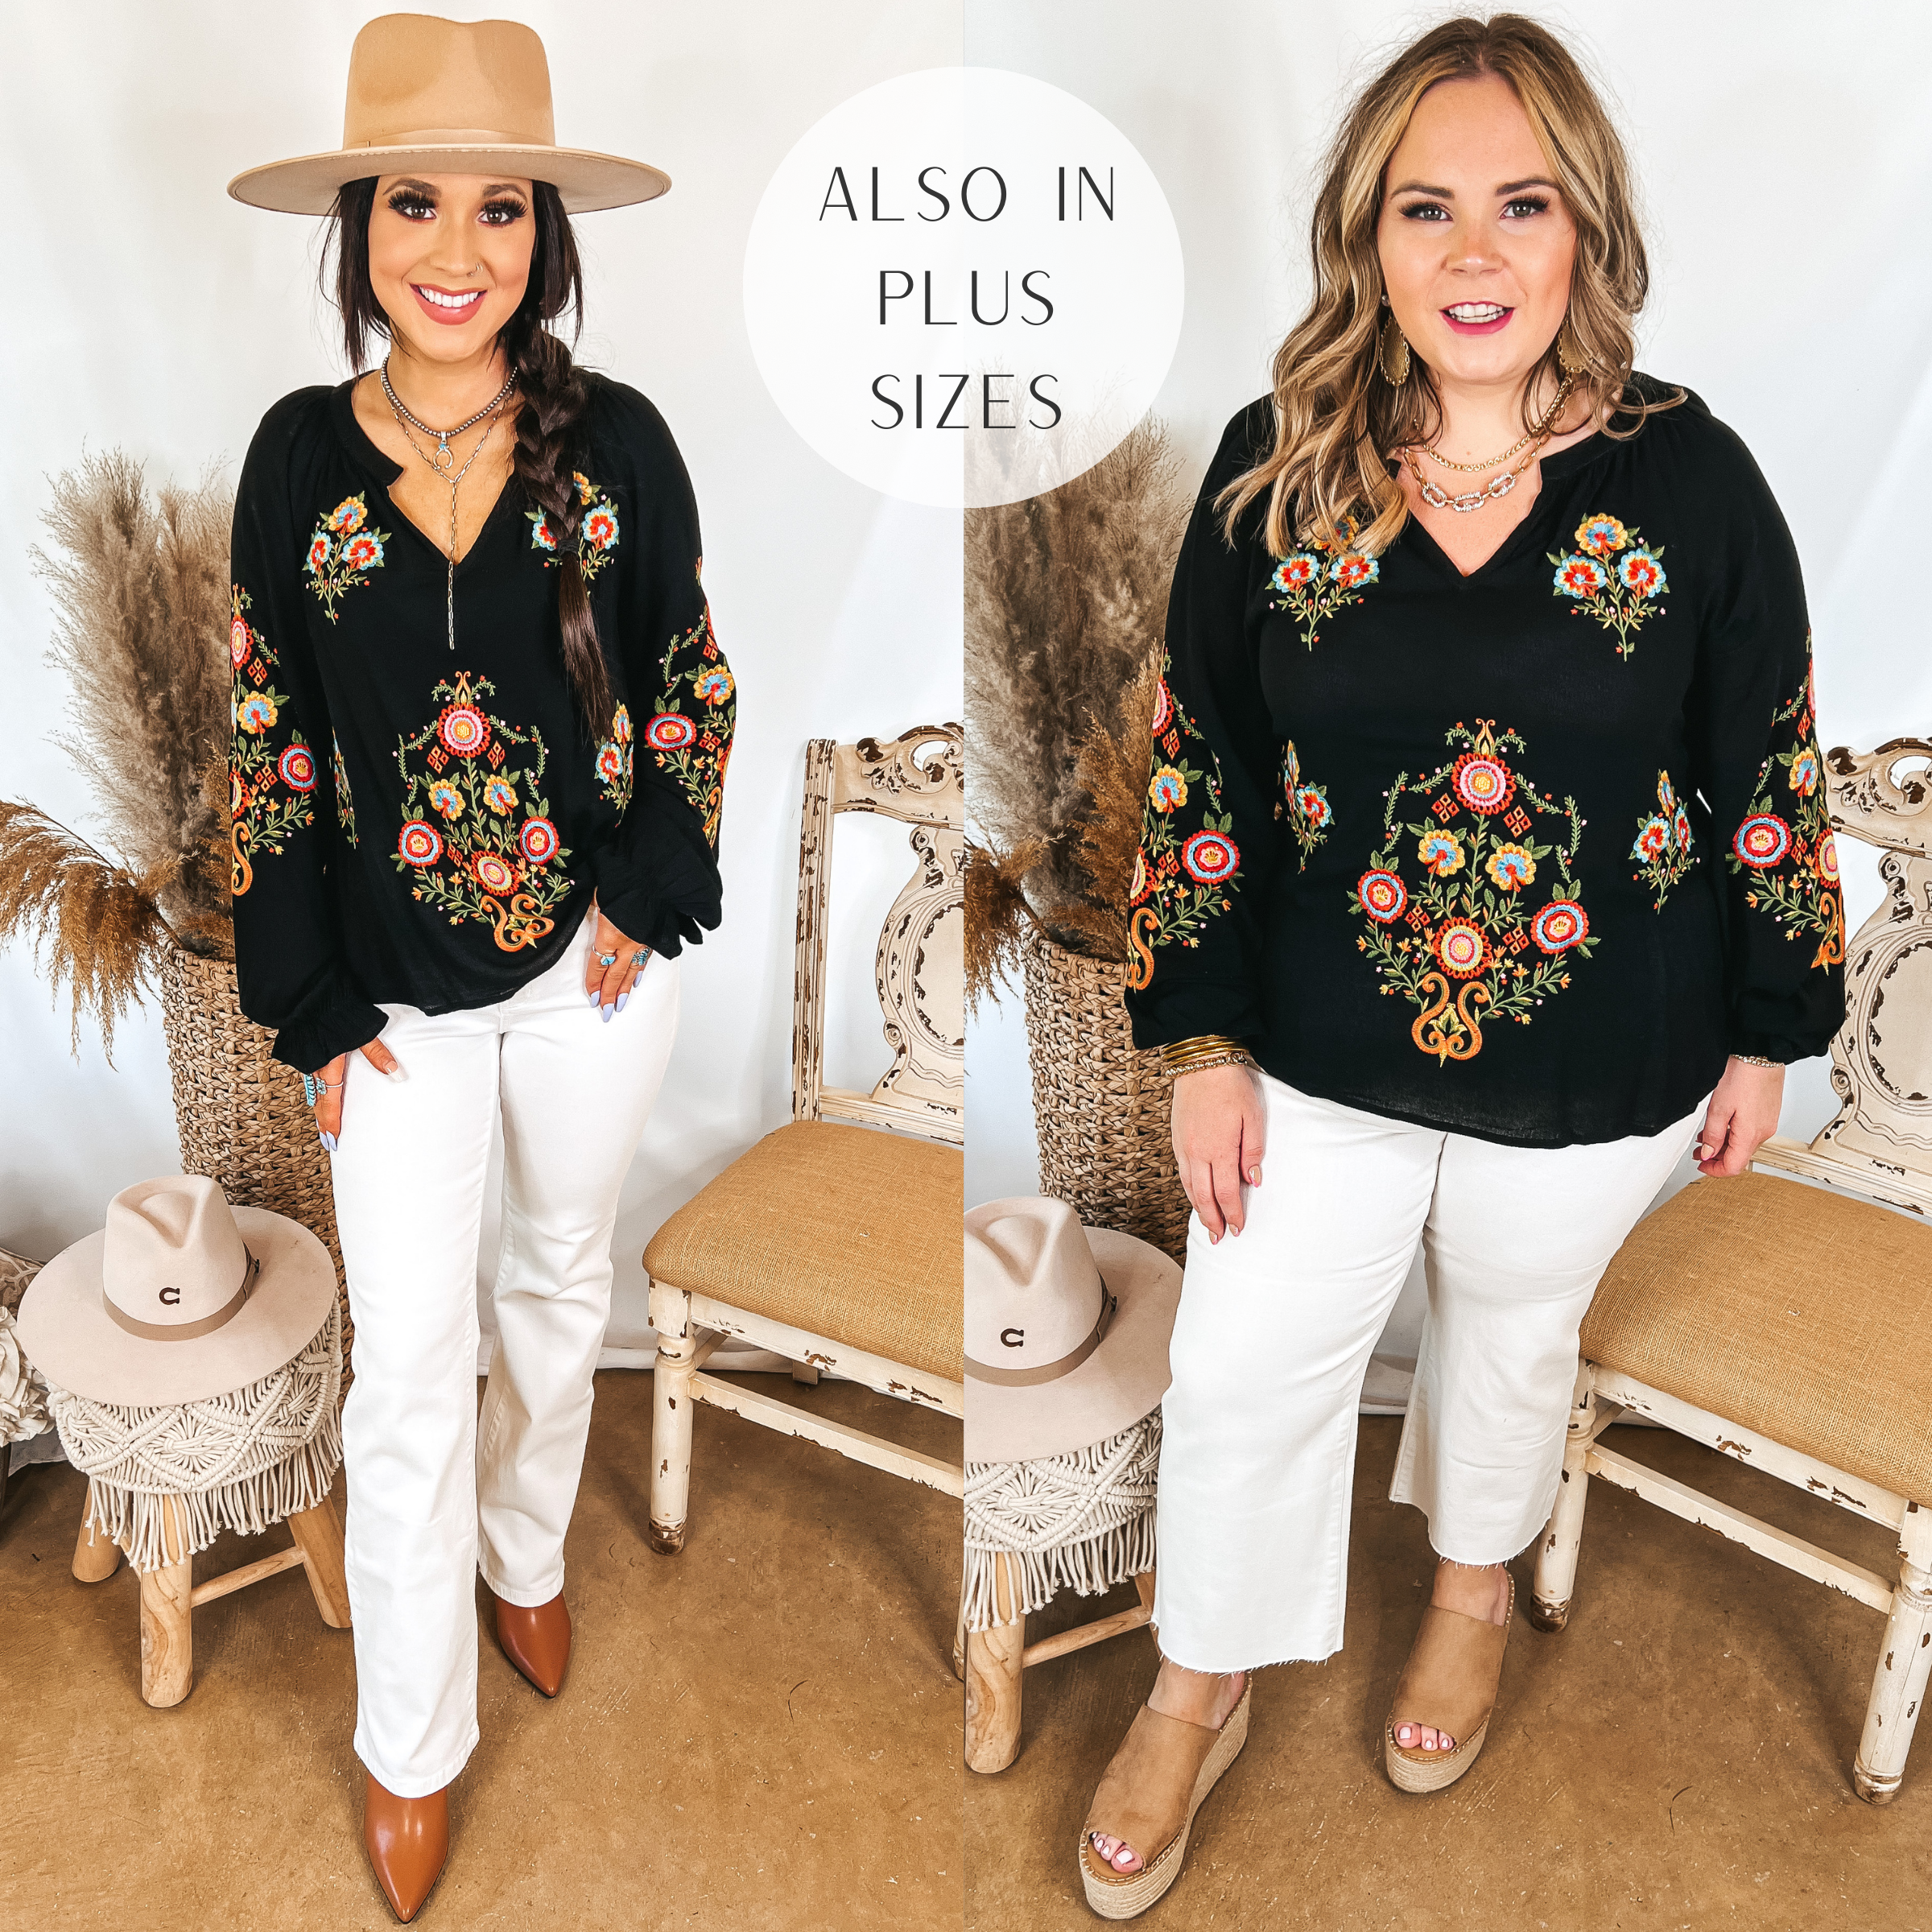 Models are wearing a long sleeve top with floral embroidery and a notched v neckline. Size small model has it paired with bootcut jeans, tan booties, and a tan hat. Size large model has it paired with white cropped jeans, tan wedges, and gold jewelry.